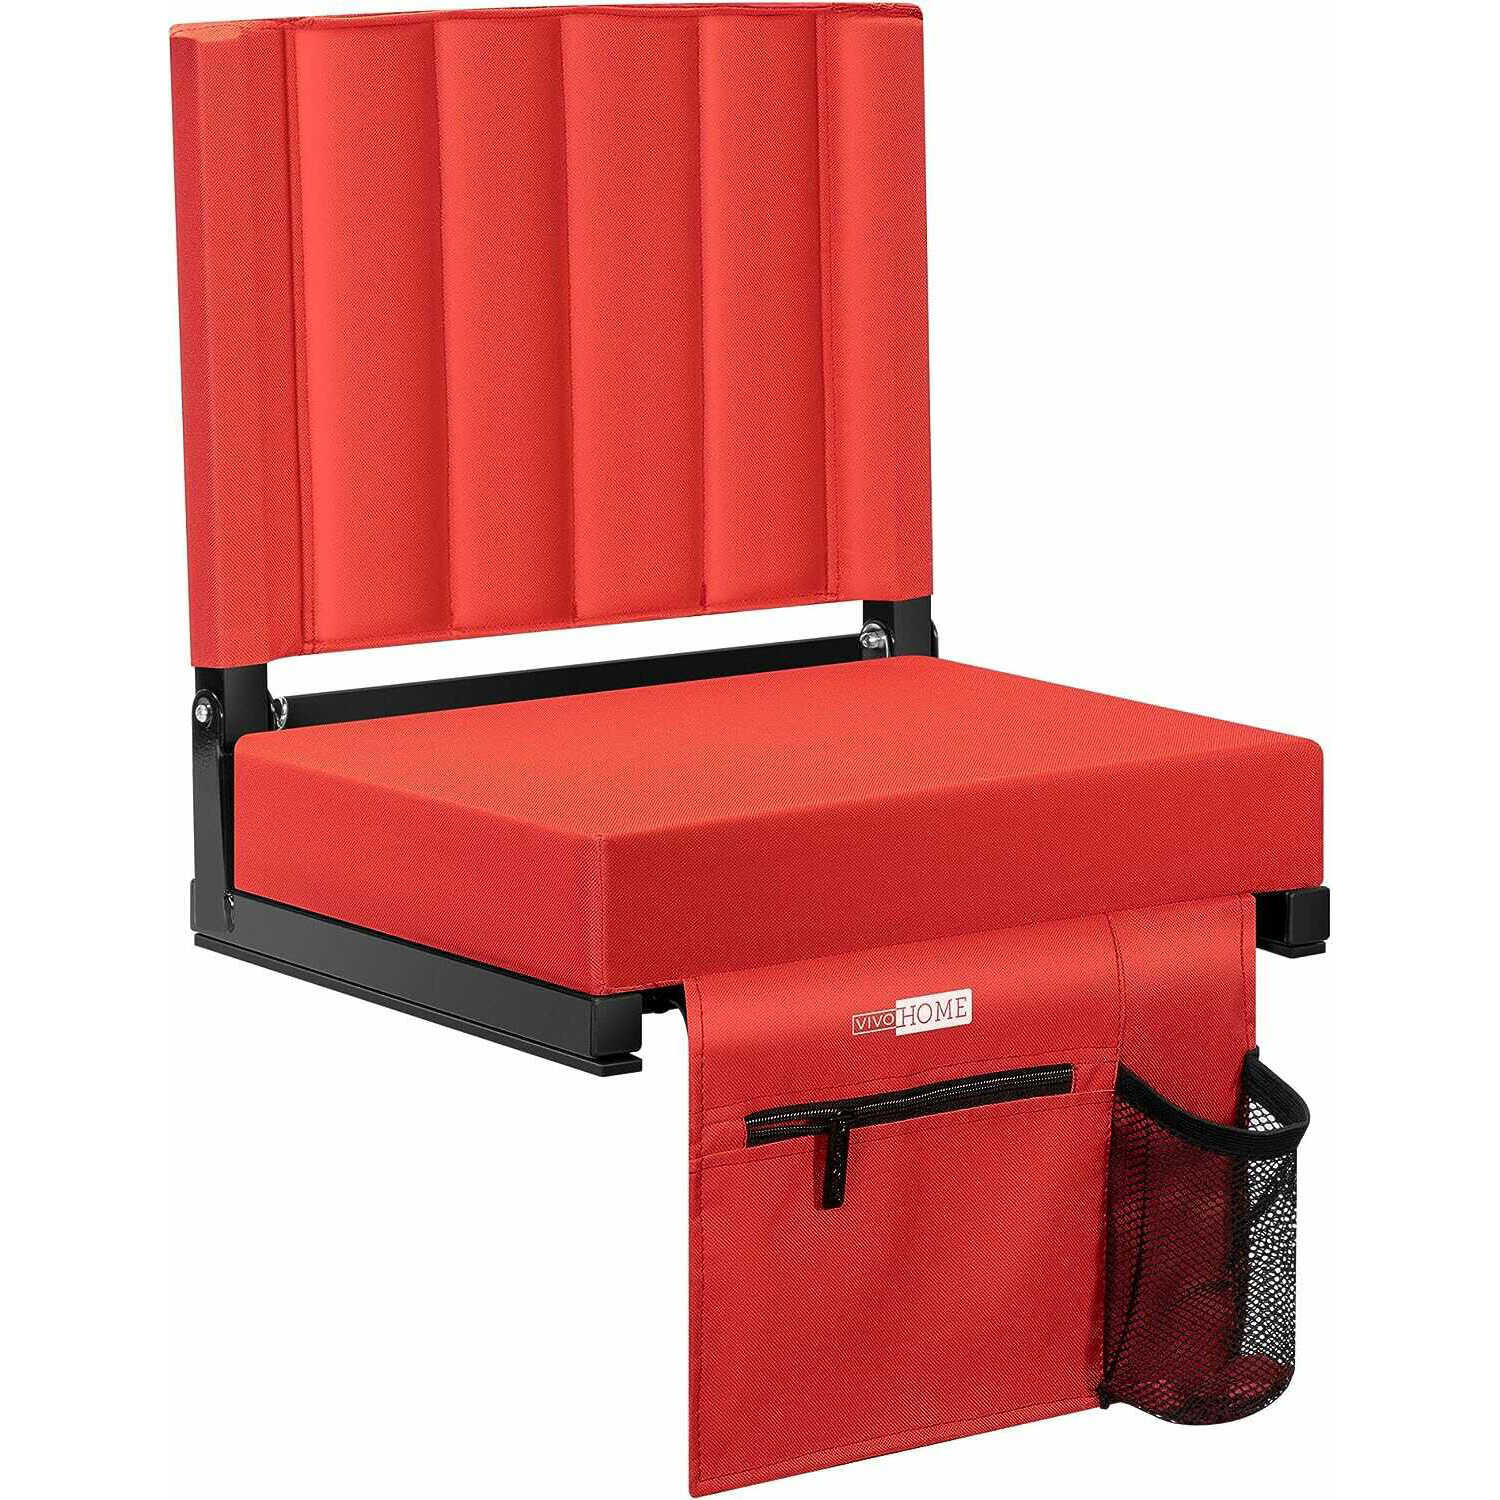 VIVOHOME Portable Stadium Seat for Bleachers with Back Support